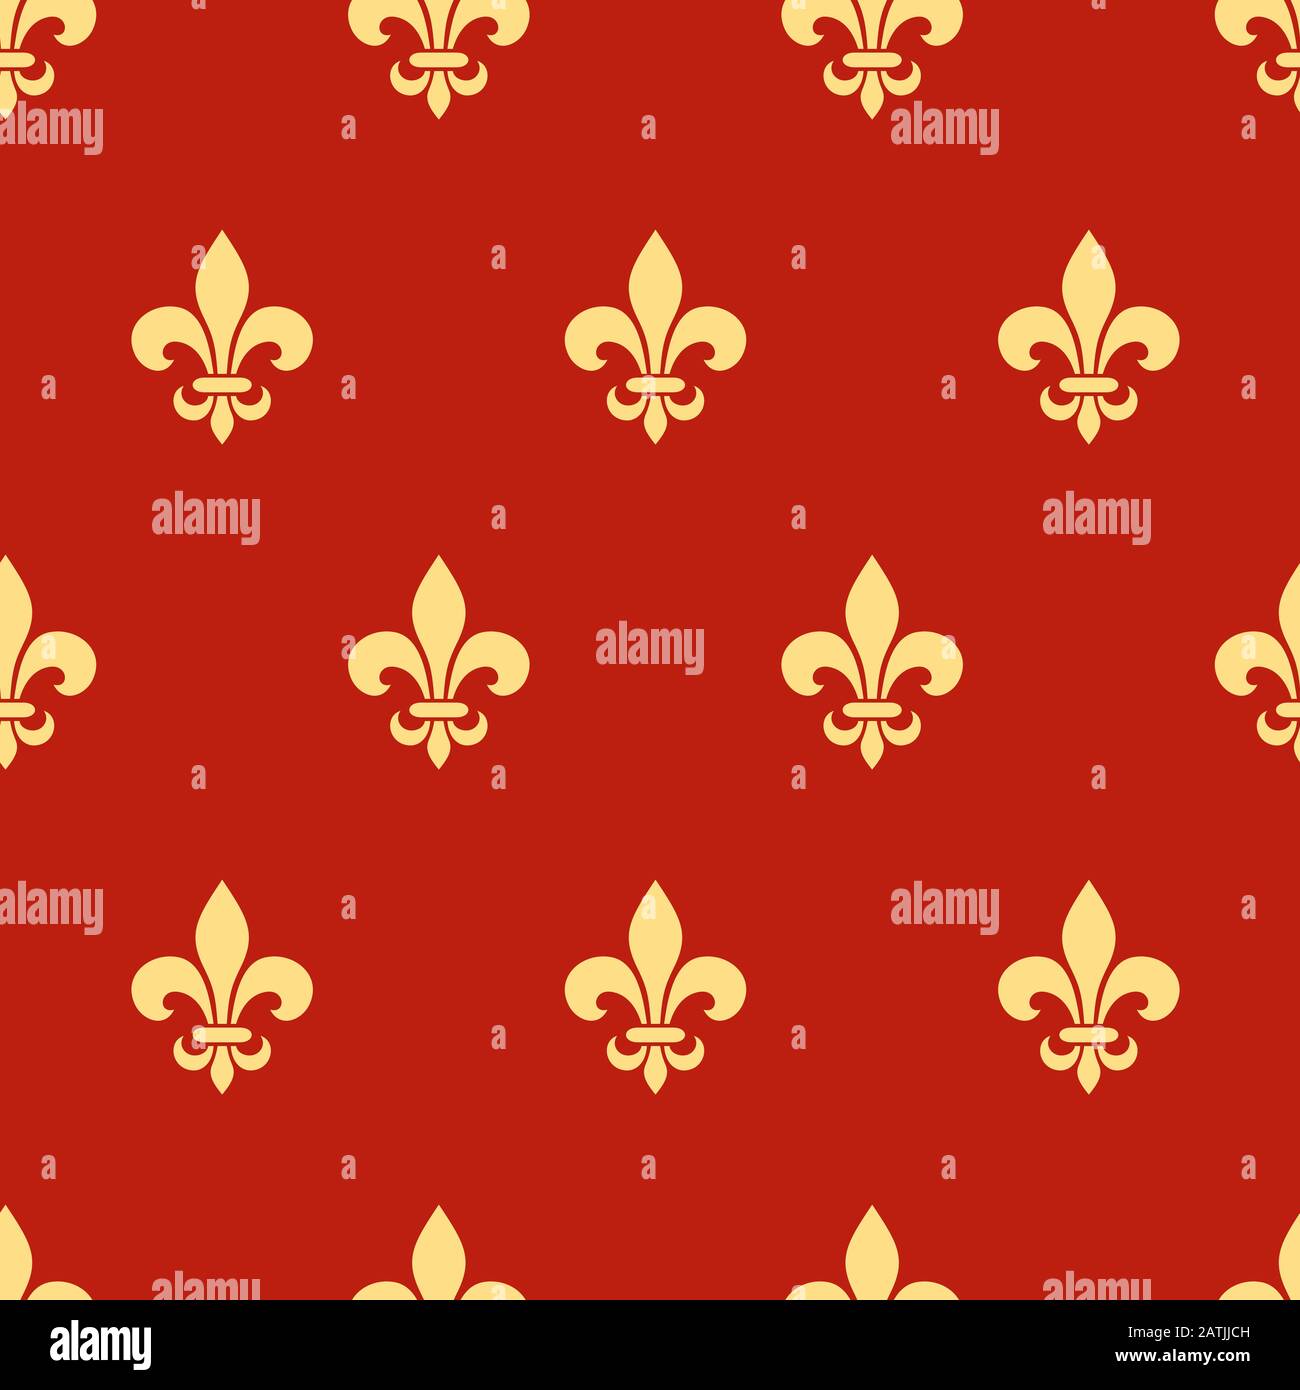 Vector seamless pattern with gold fleur-de-lis symbols on red. Stock Vector